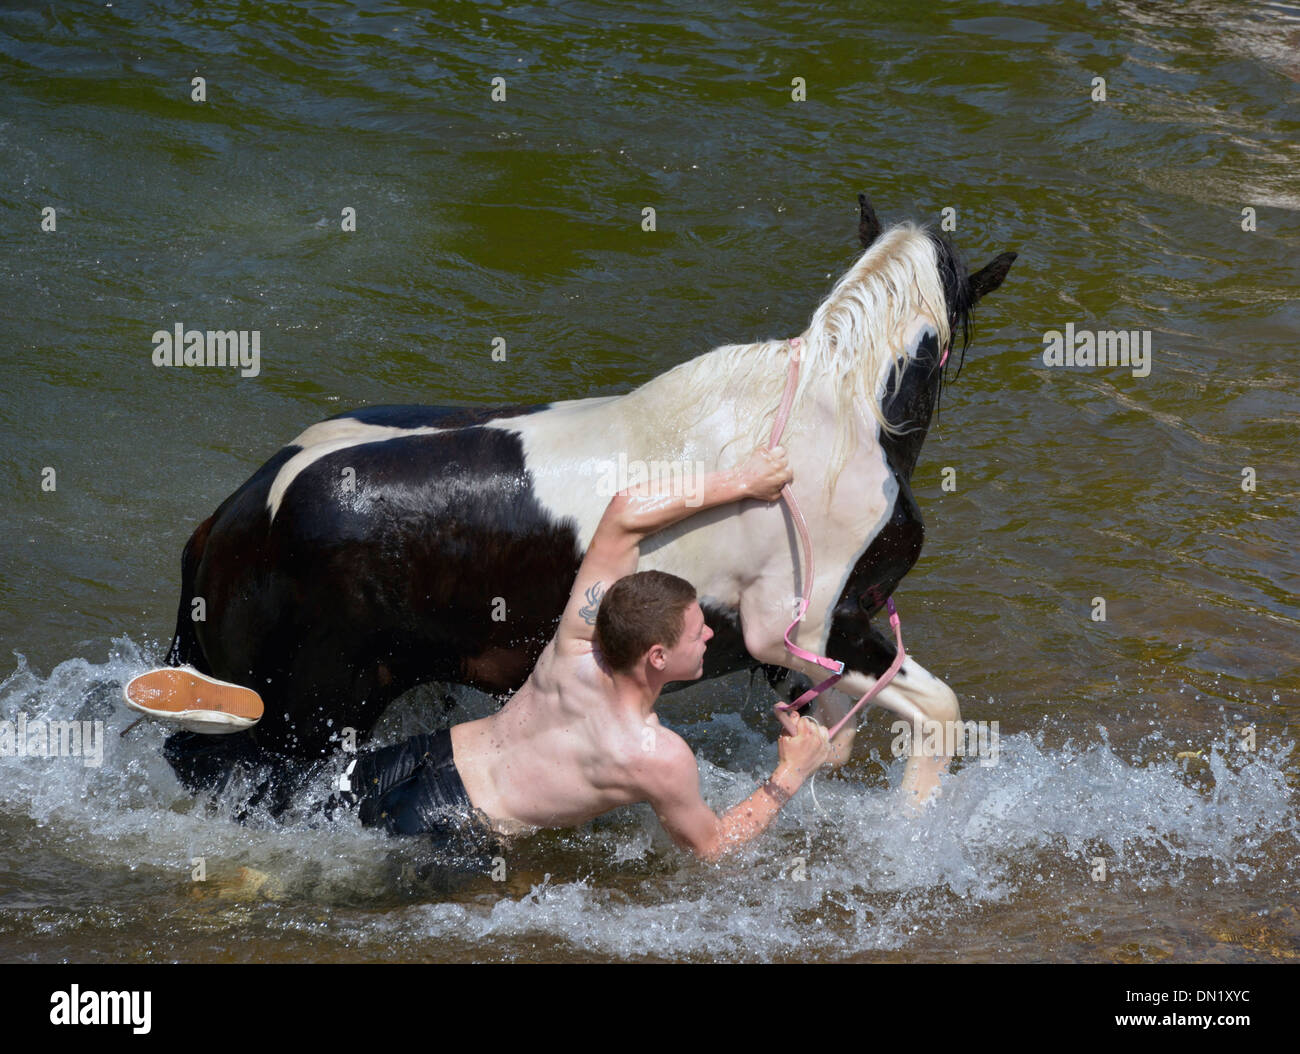 Gypsy traveller boy with horse in River Eden. Appleby Horse Fair, Appleby-in-Westmorland, Cumbria, England, United Kingdom. Stock Photo